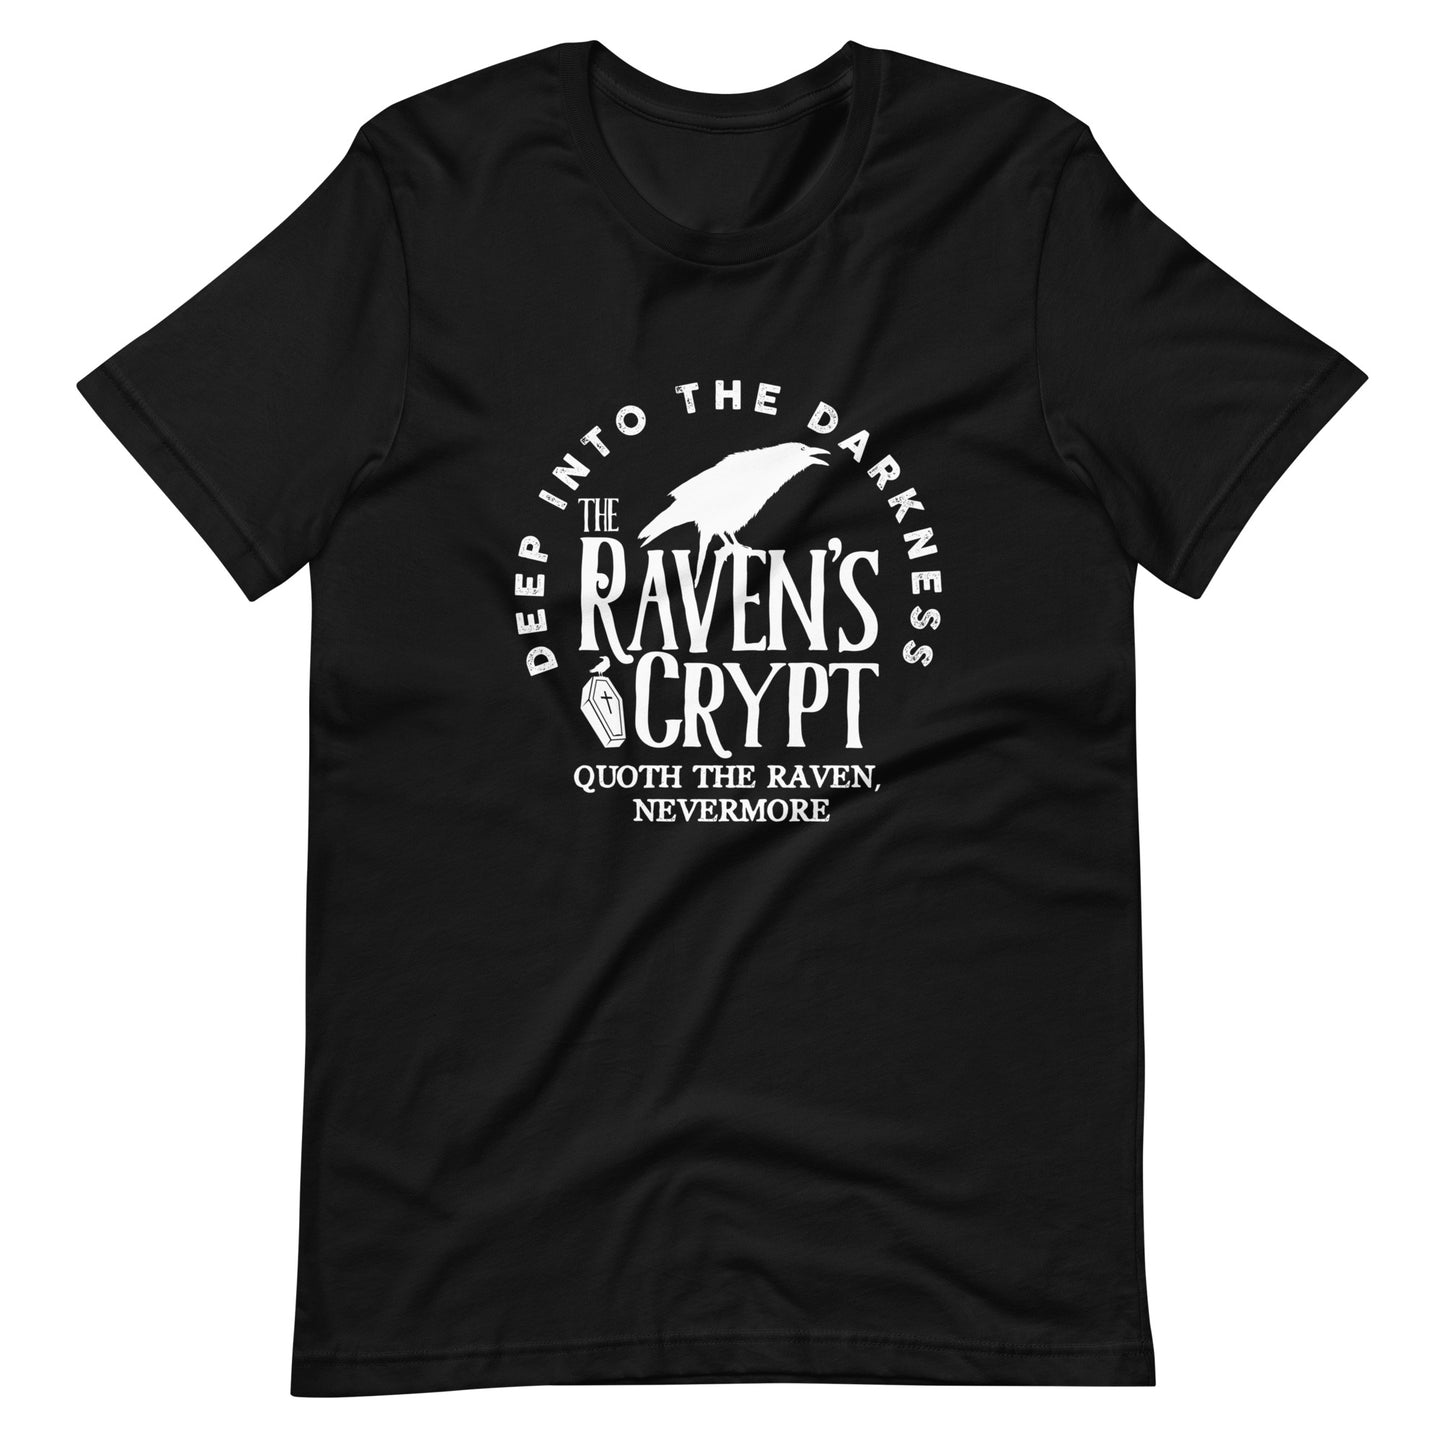 Deep Into the Darkness The Raven's Crypt - Men's t-shirt - Black Front